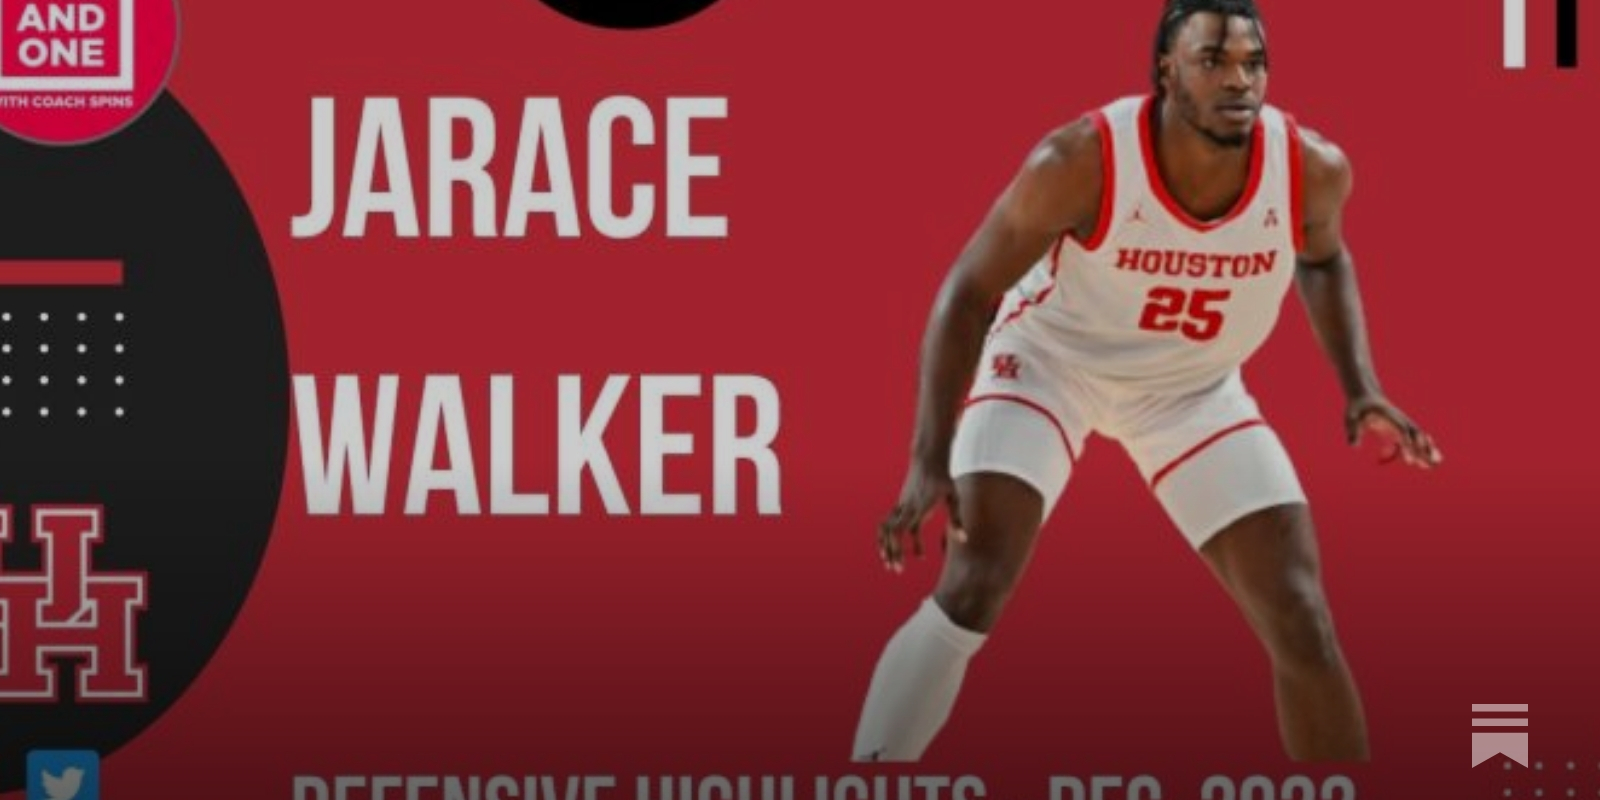 Jarace Walker picked 8th by Indiana Pacers in NBA Draft - The Cougar